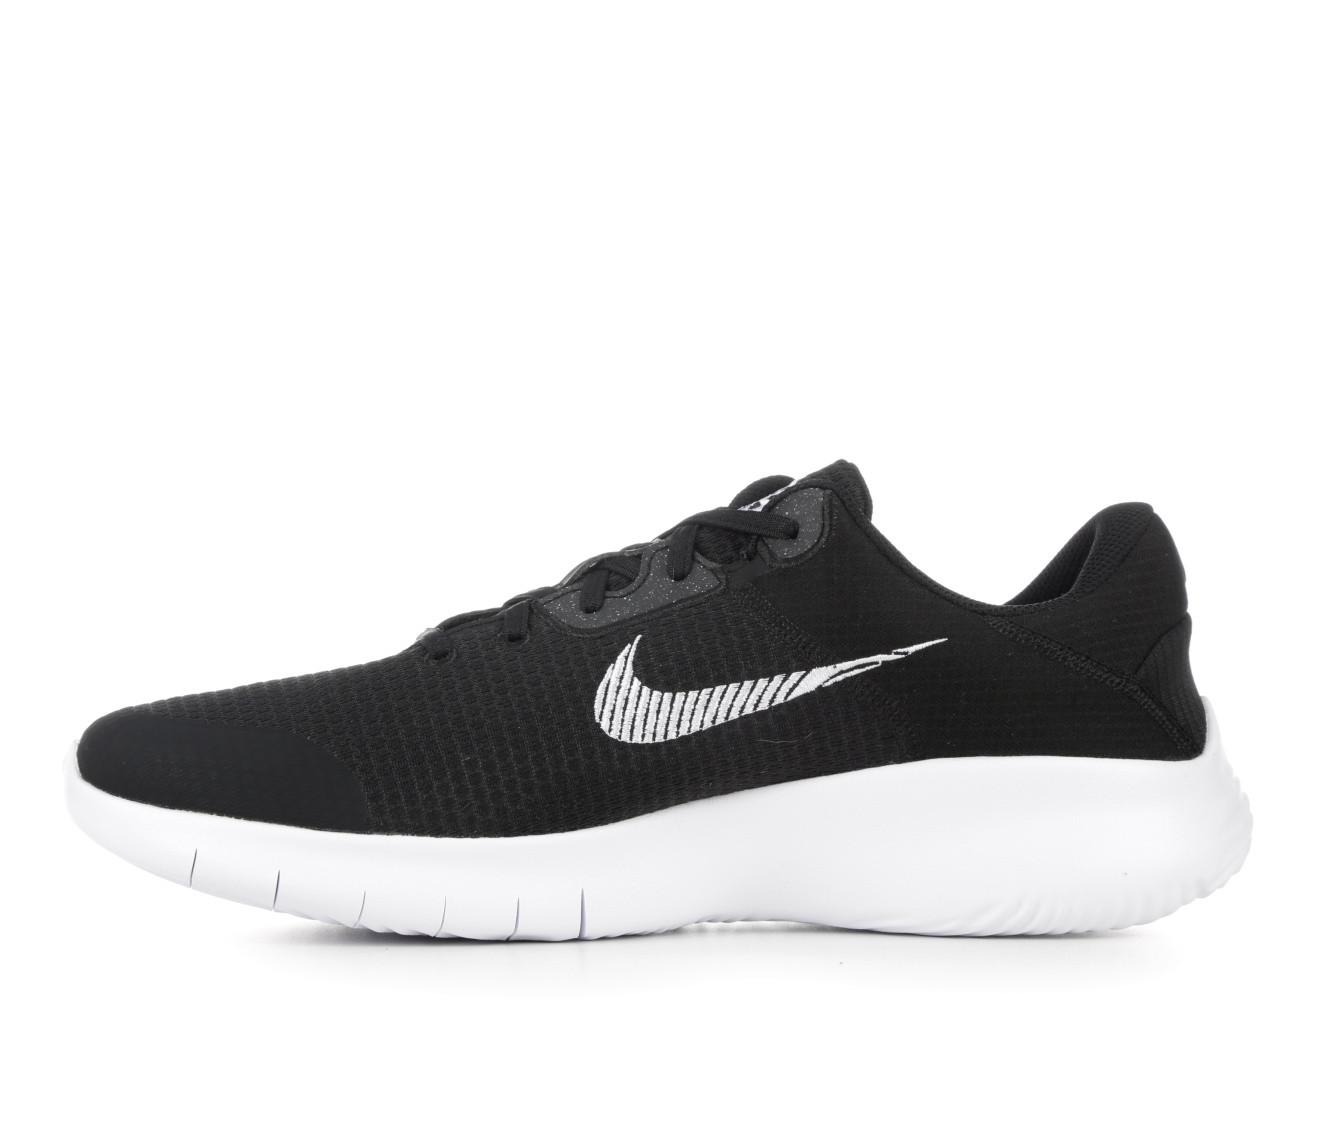 lood Pijler Zuiver Men's Nike Flex Experience Run 11 Sustainable Running Shoes